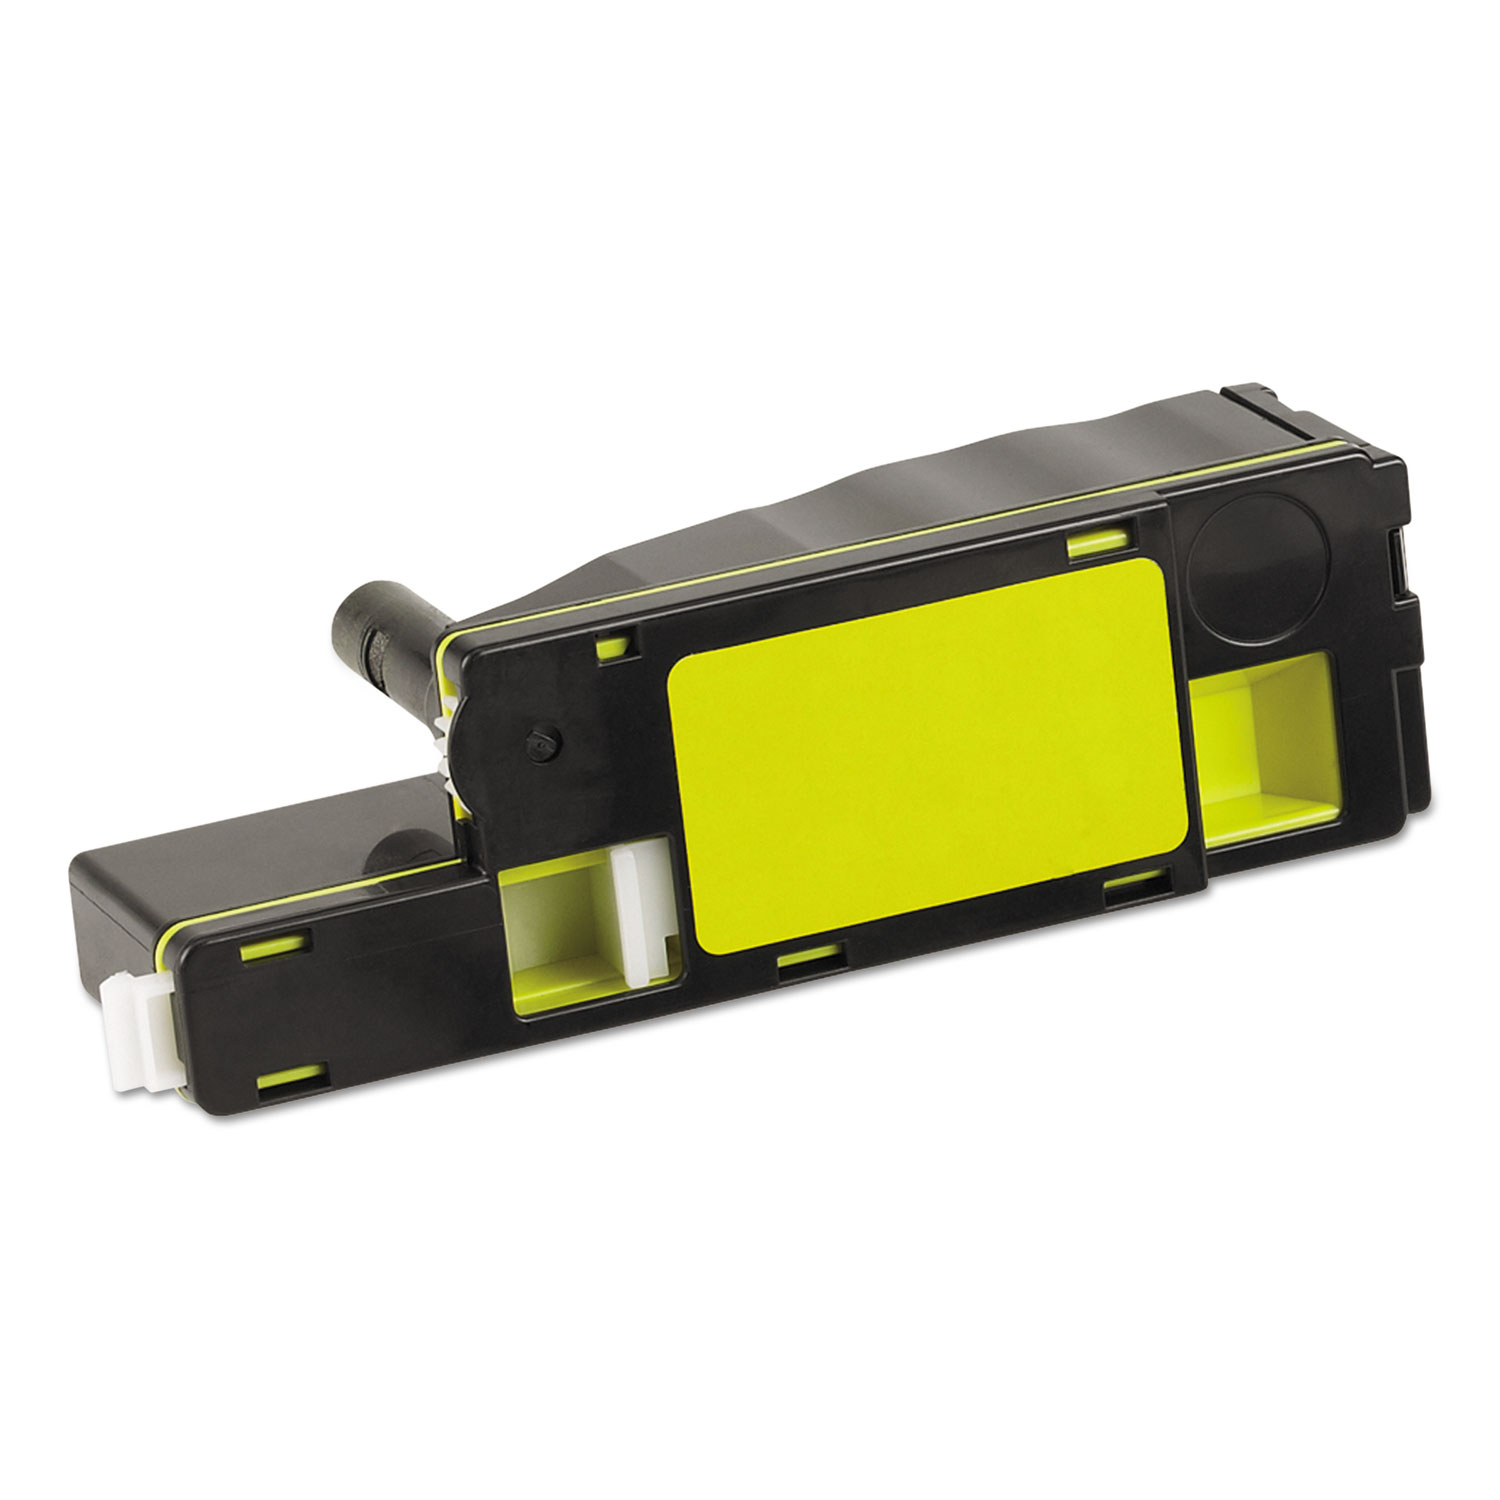 41088 Remanufactured 331-0779 (5M1VR) High-Yield Toner, Yellow